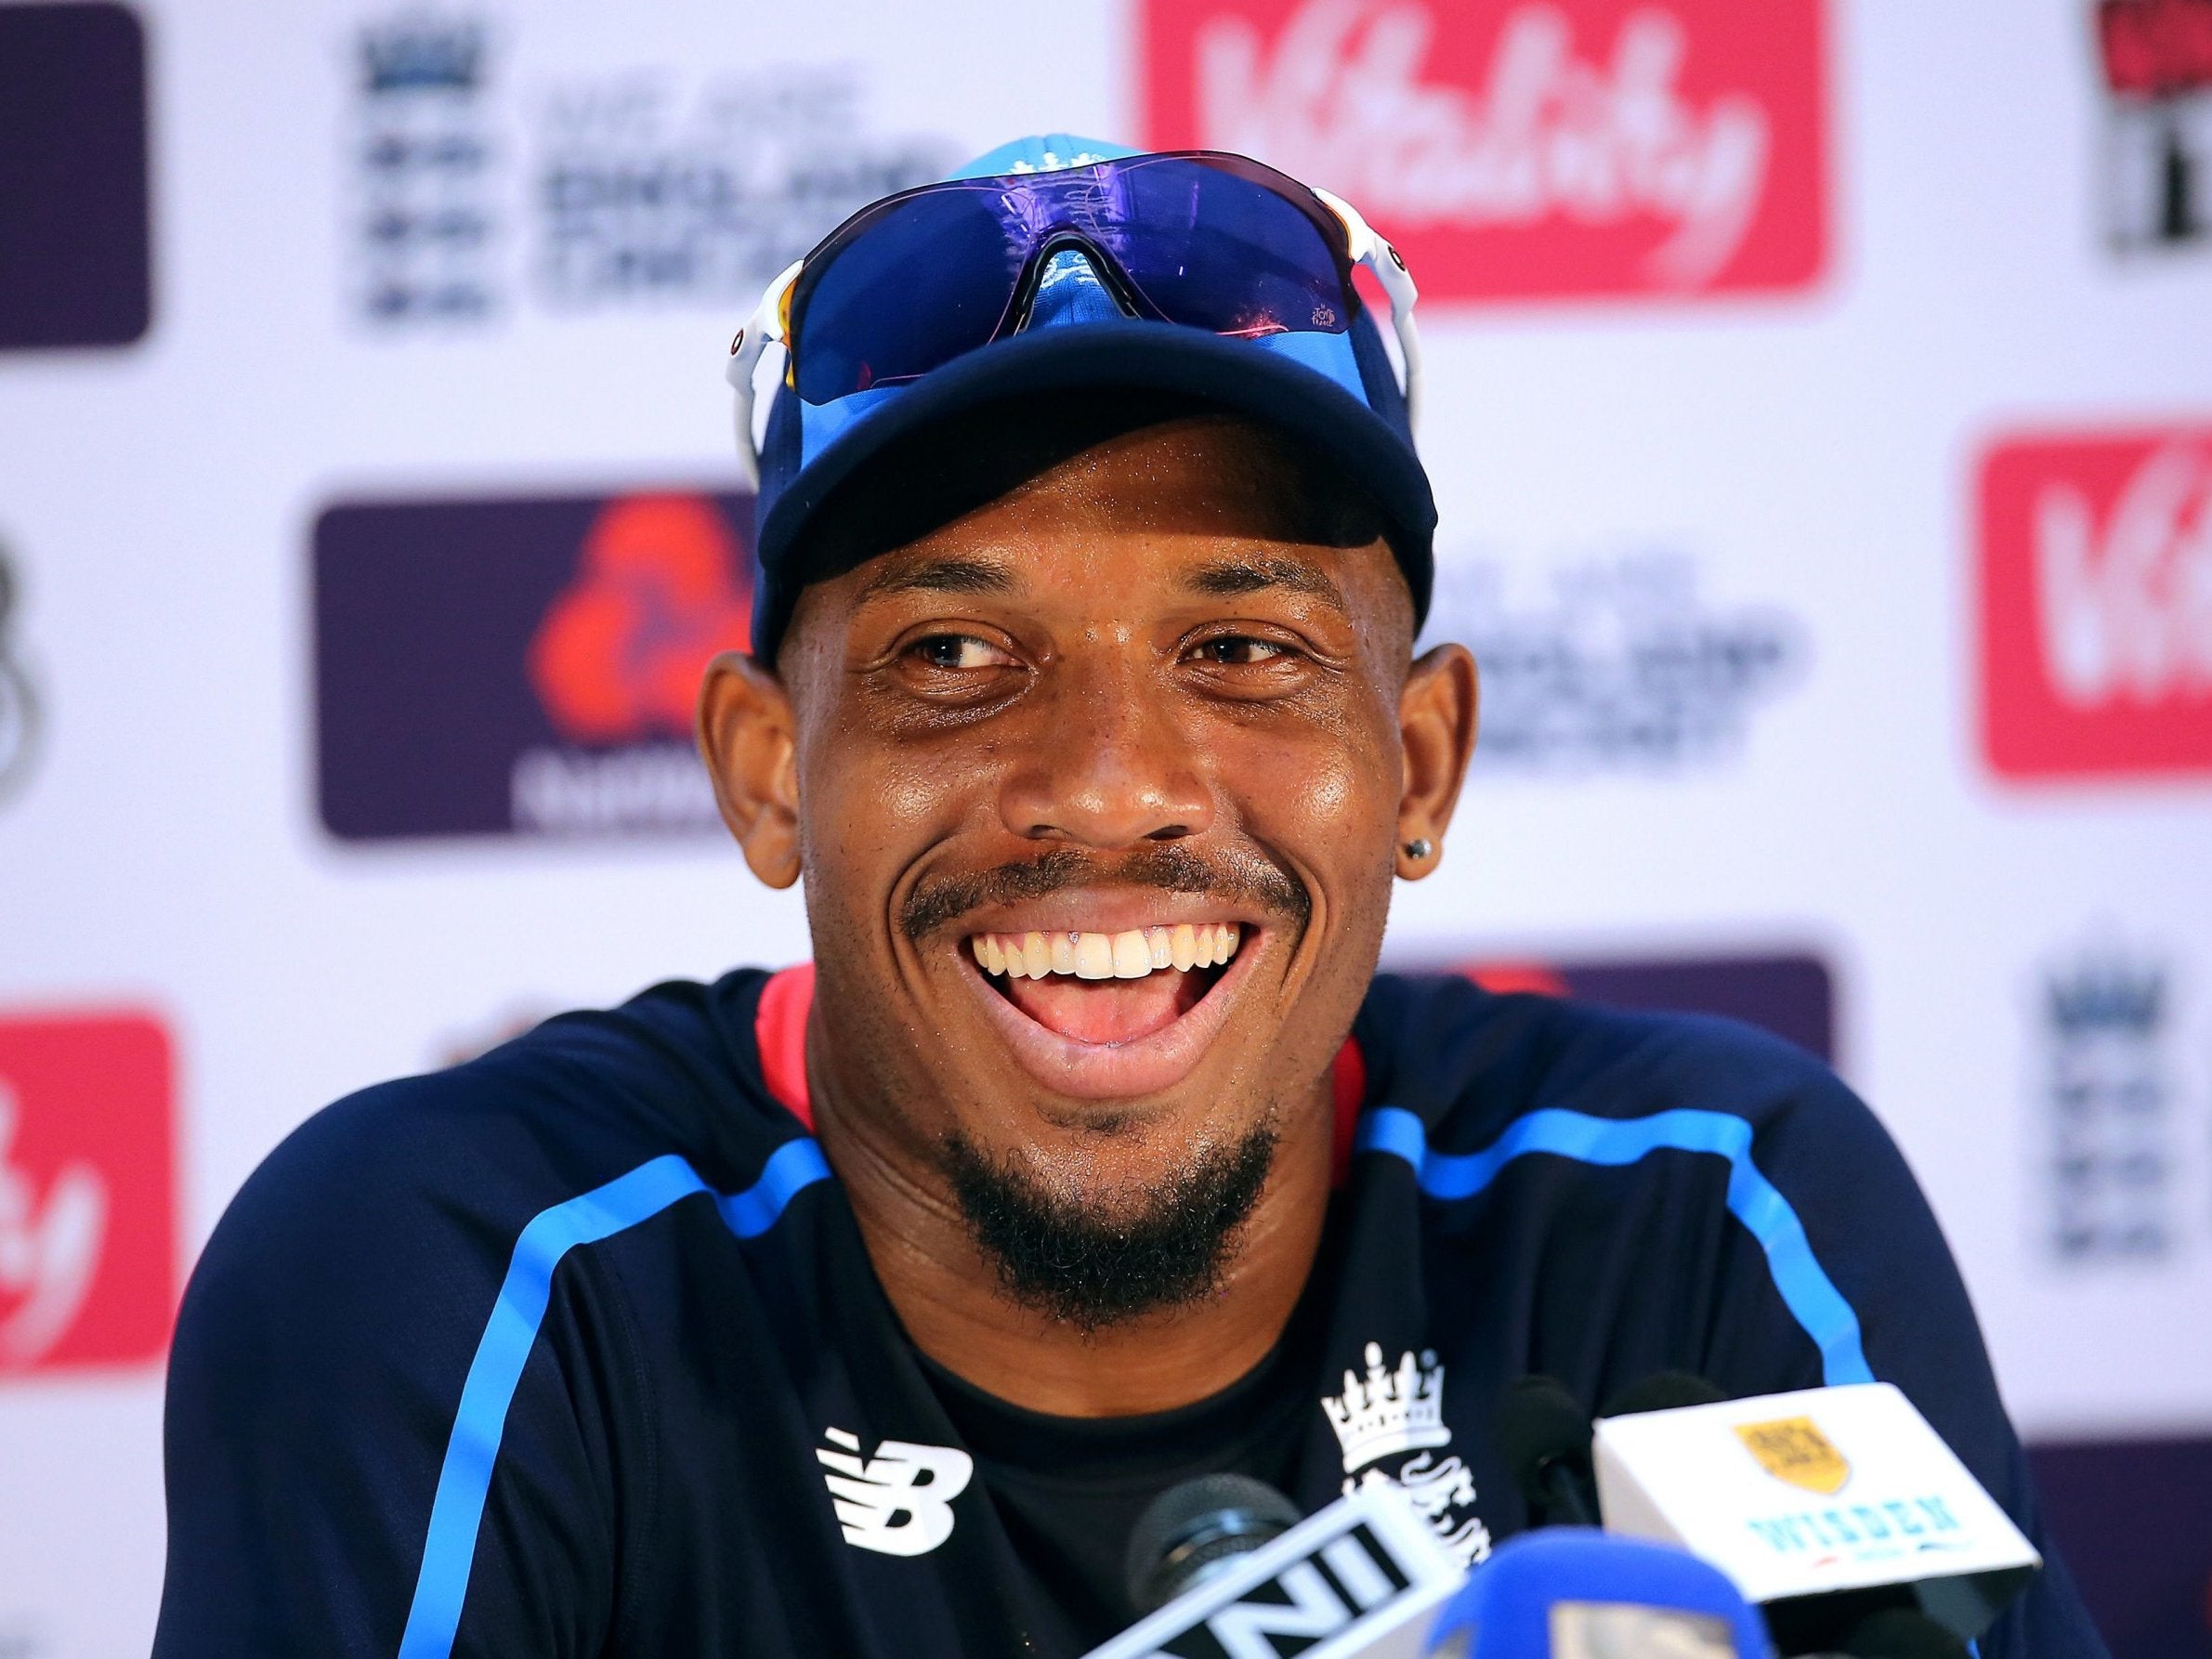 England are determined to bounce back from defeat in the first T20